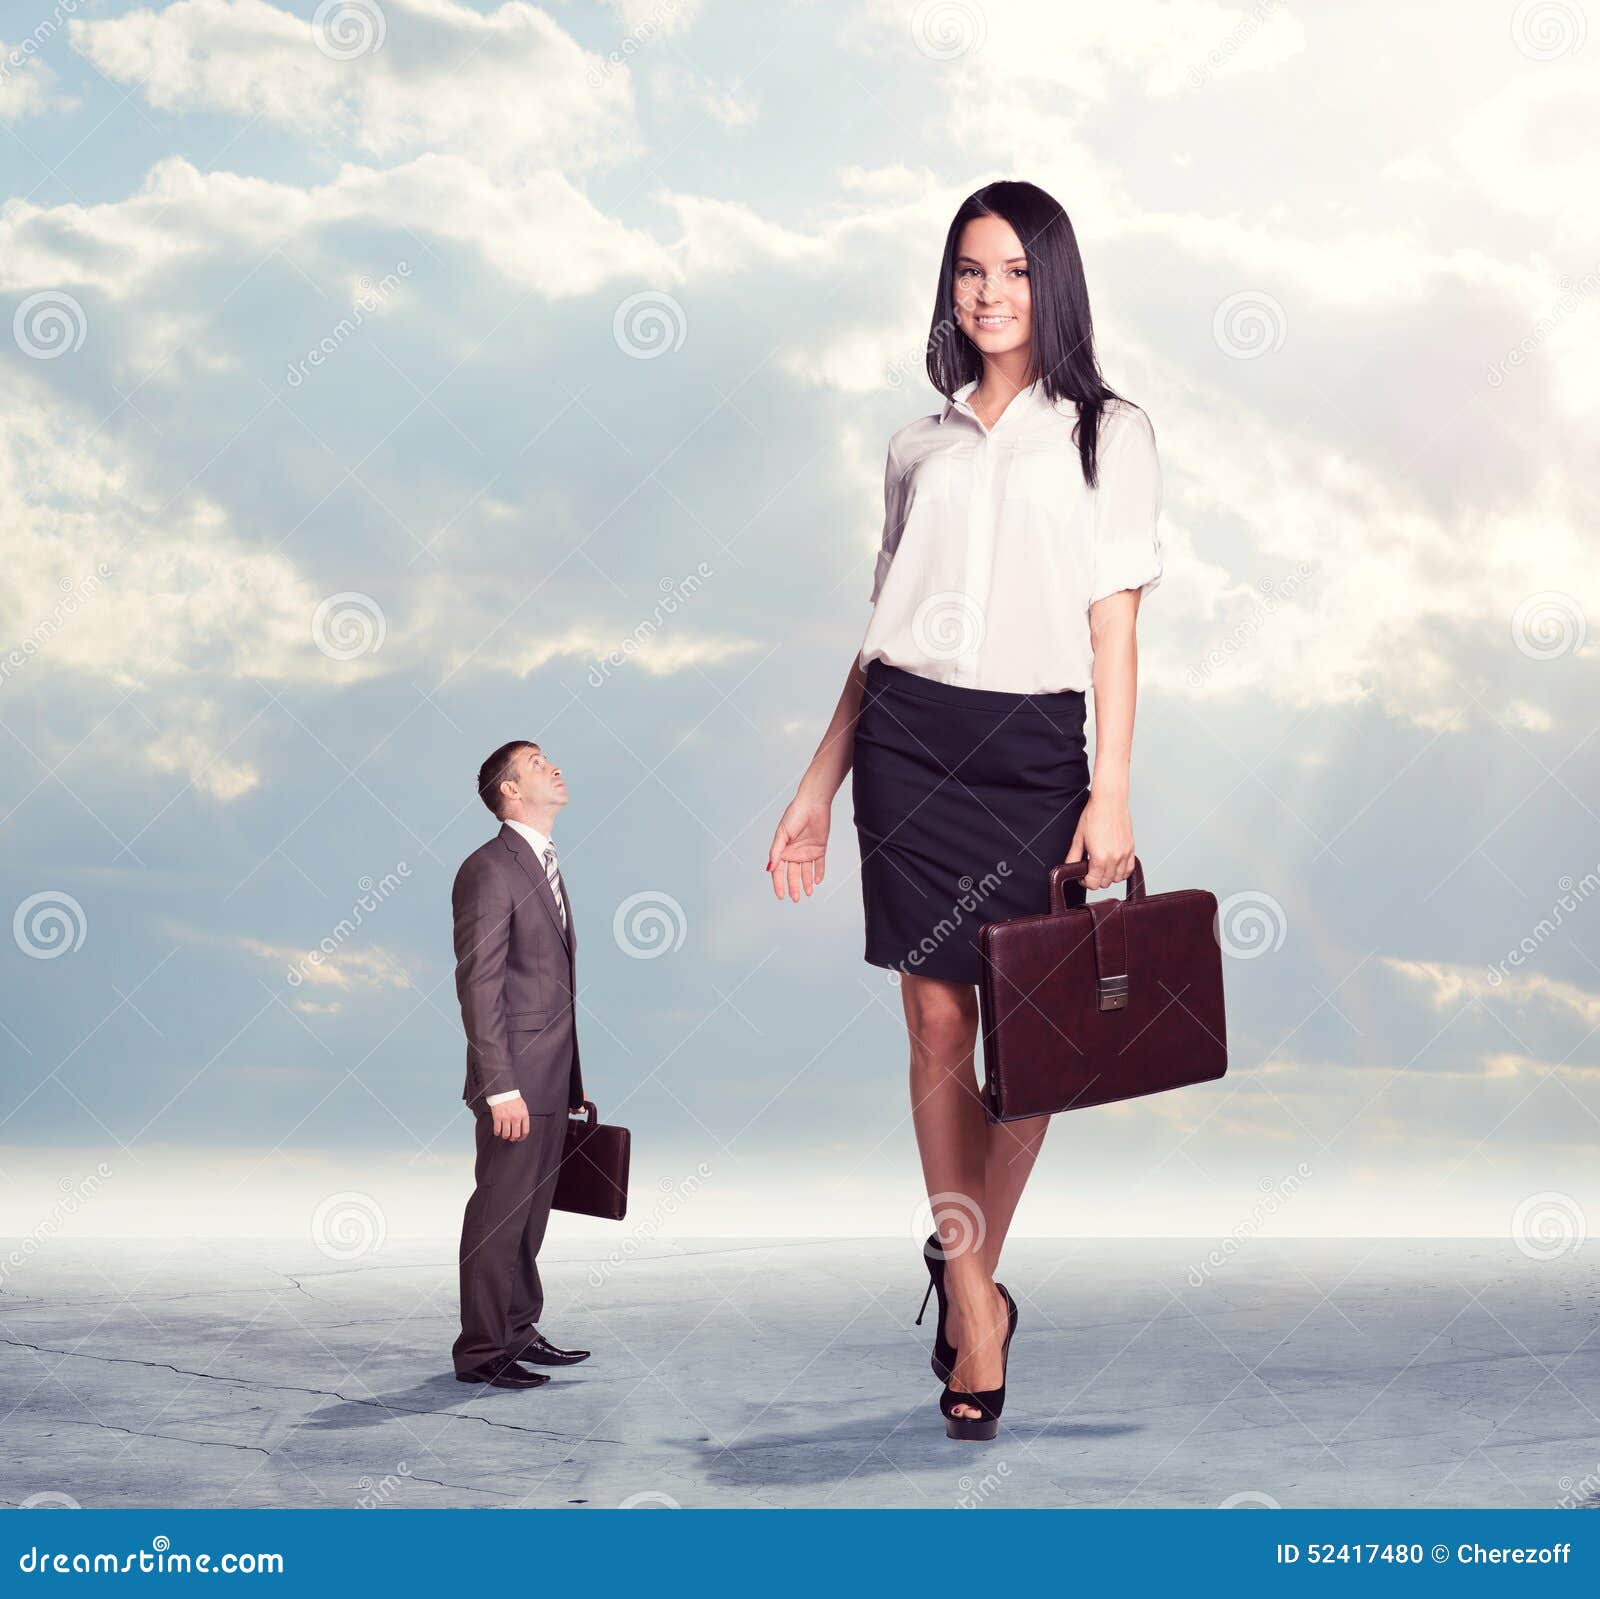 Small Businessman Looking Up at on High Walking Stock Photo - Image of ...